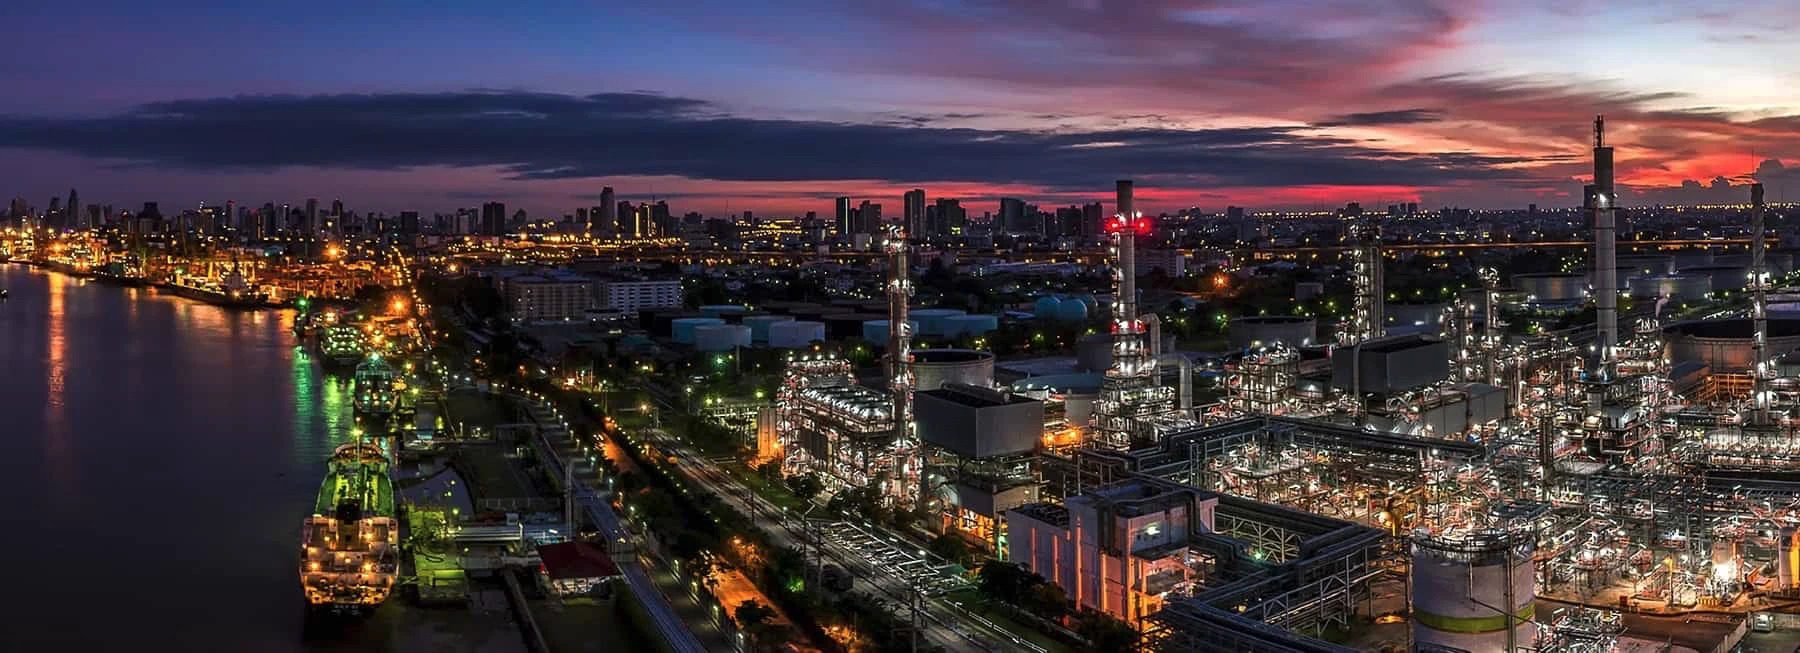 An oil refinery at dusk with a city in the background.